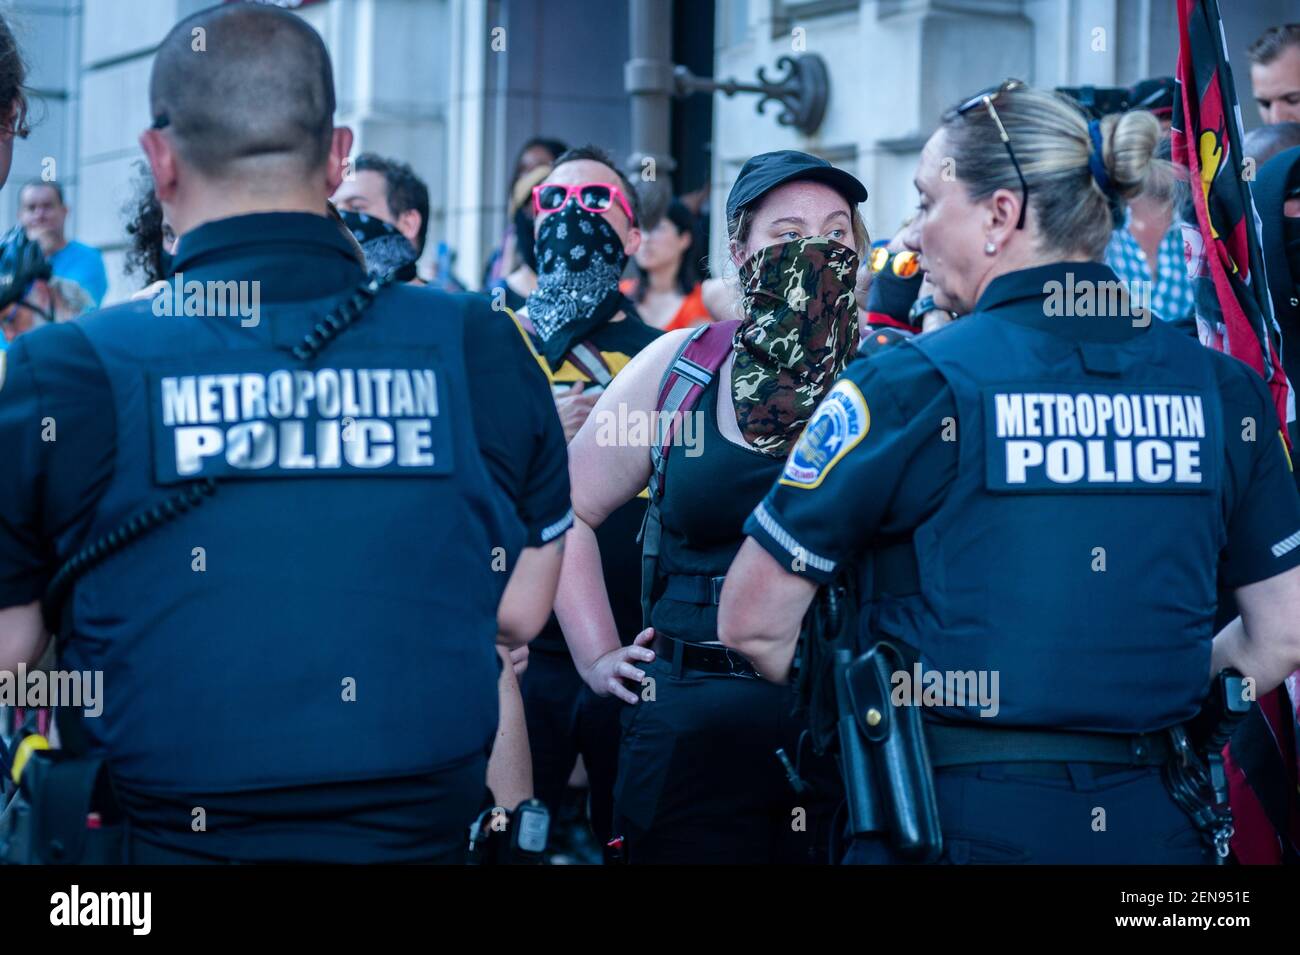 Metropolitian Police blocking Antifa members from the Trump Hotel in Washington D.C. on July 6, 2019. After the Demand Free Speech rally in Freedom plaza in the morning, the same organizers held a 'VIP Lounge Event' at the Trump Hotel in Washington D.C. on Saturday, July 6, 2019. Attendees entering the venue were greeted by Antifa members. Metropolitan police were quick to separate the opposing groups. One Antifa member was arrested in the process. Stock Photo